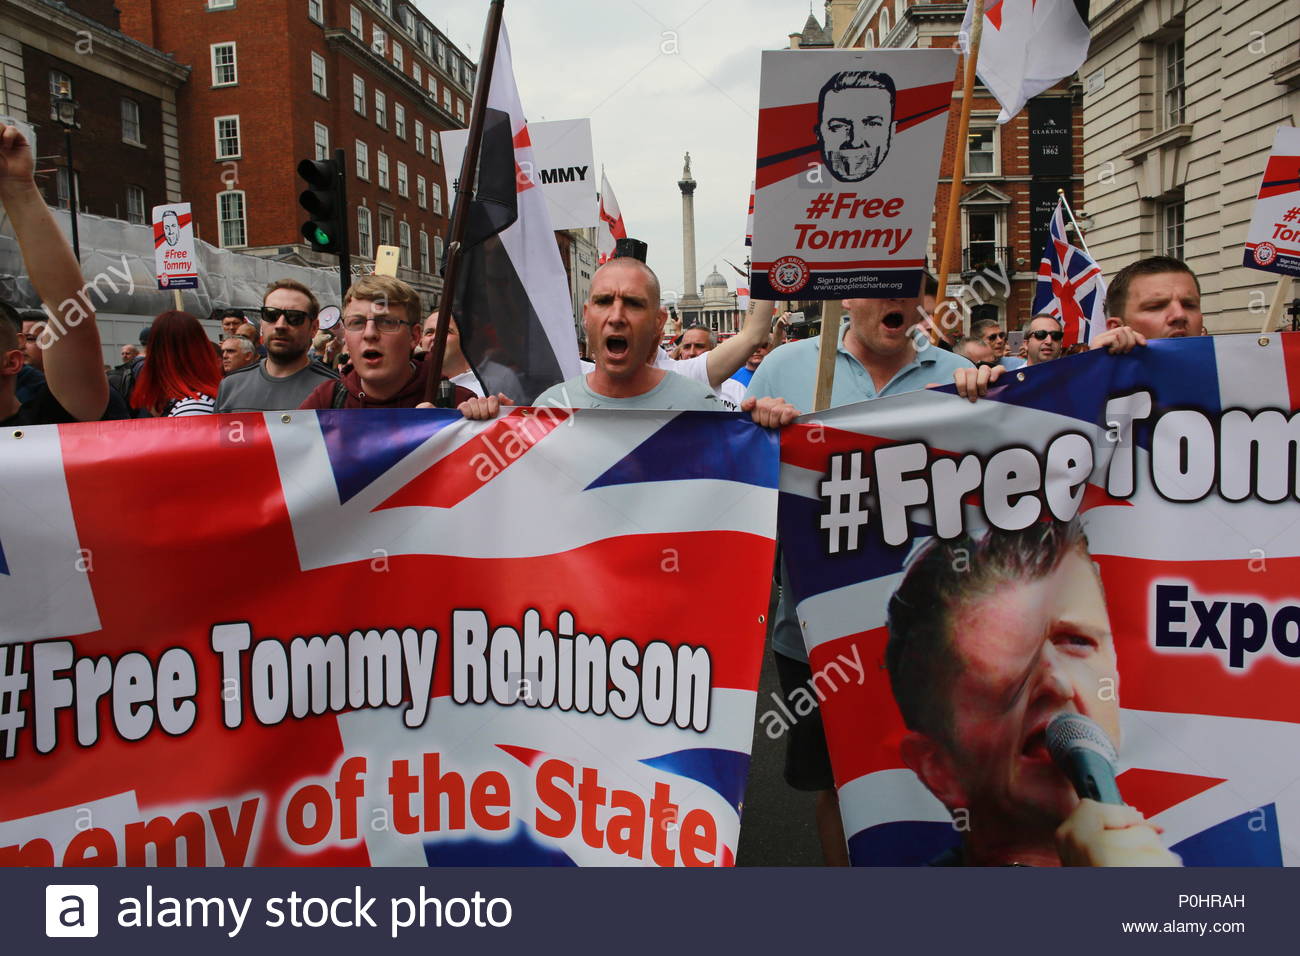 London, UK, 9 June 2018.A demonstration has been held in Central London in support of Tommy Robinson. A large crowd of his supporters marched from Trafalgar Square to Downing Street. A counter demonstration was held some distance away and a large police force was present. In this shot the group makes its way towards Downing Street. Credit: Clearpix/Alamy Live News Stock Photo